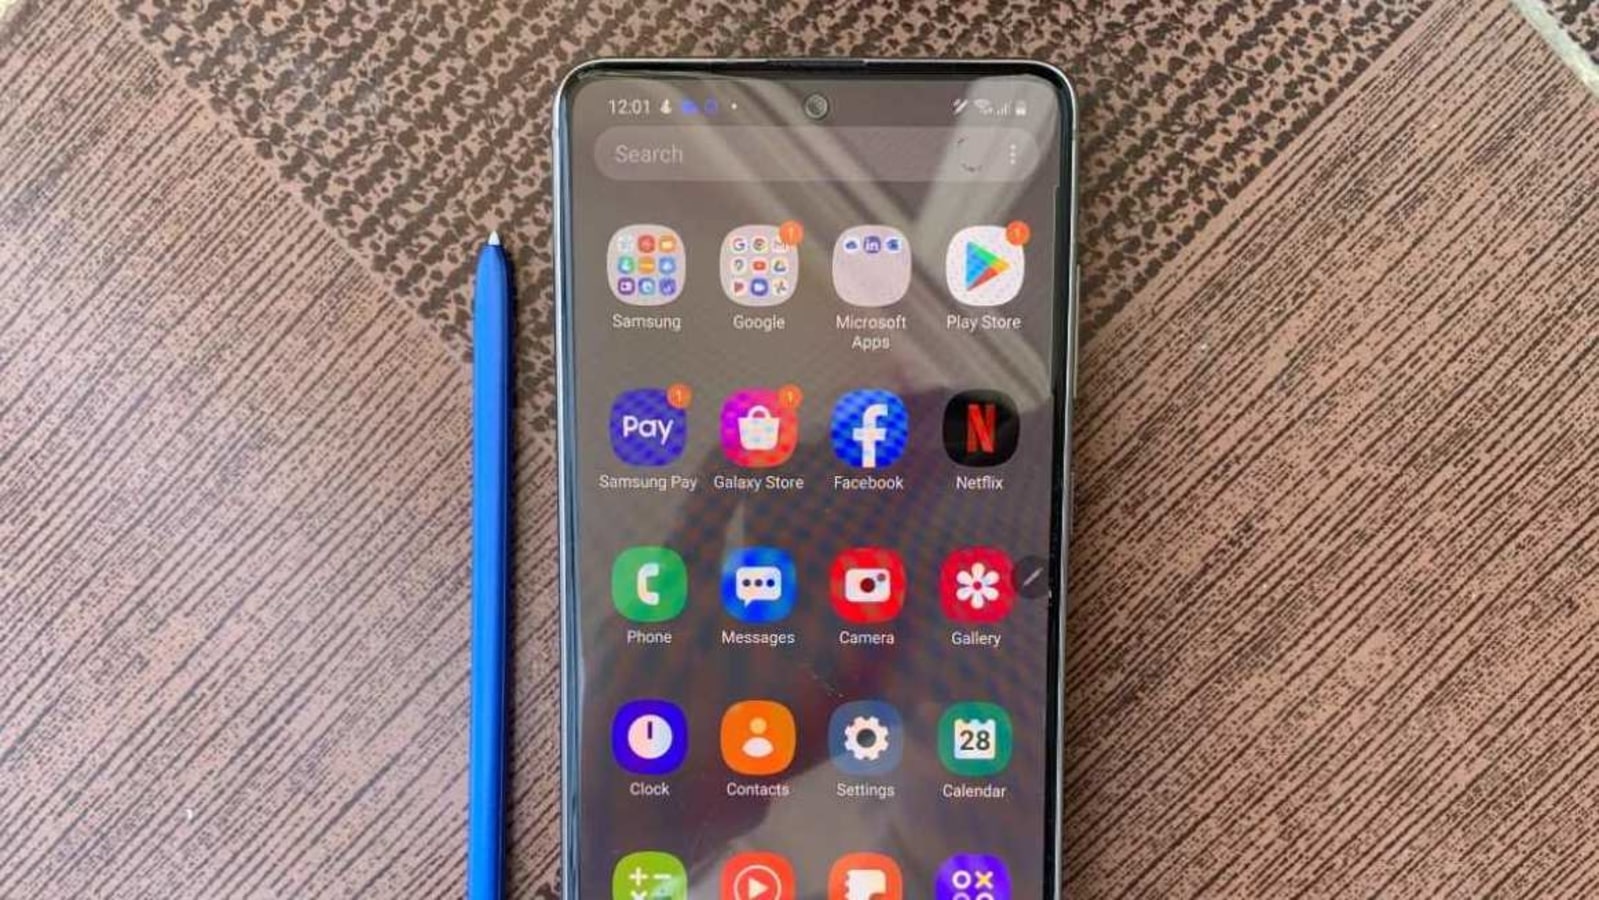 Review - Samsung Galaxy Note10 Lite: A compelling offer